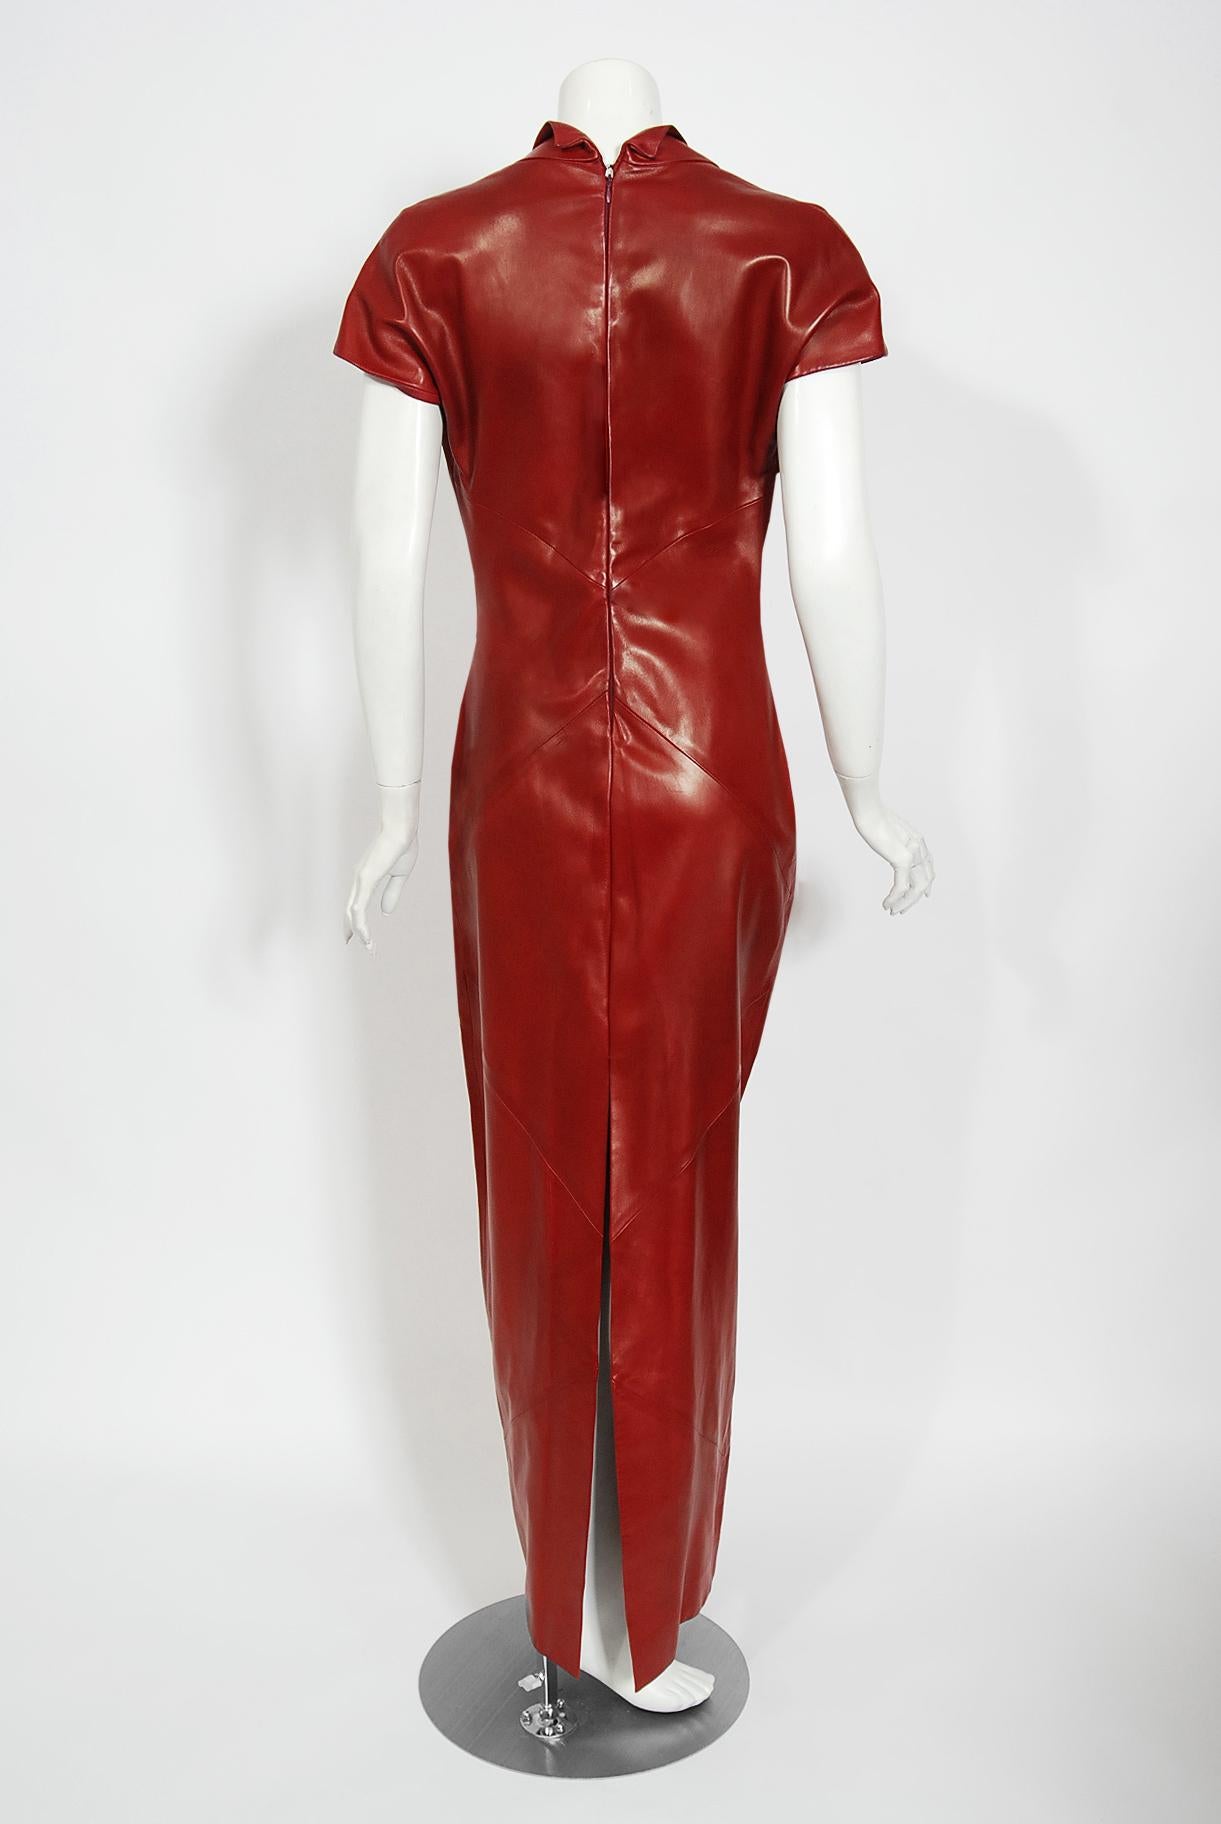 Vintage 1998 Alexander McQueen For Givenchy Runway Red Leather Low-Plunge Gown  1